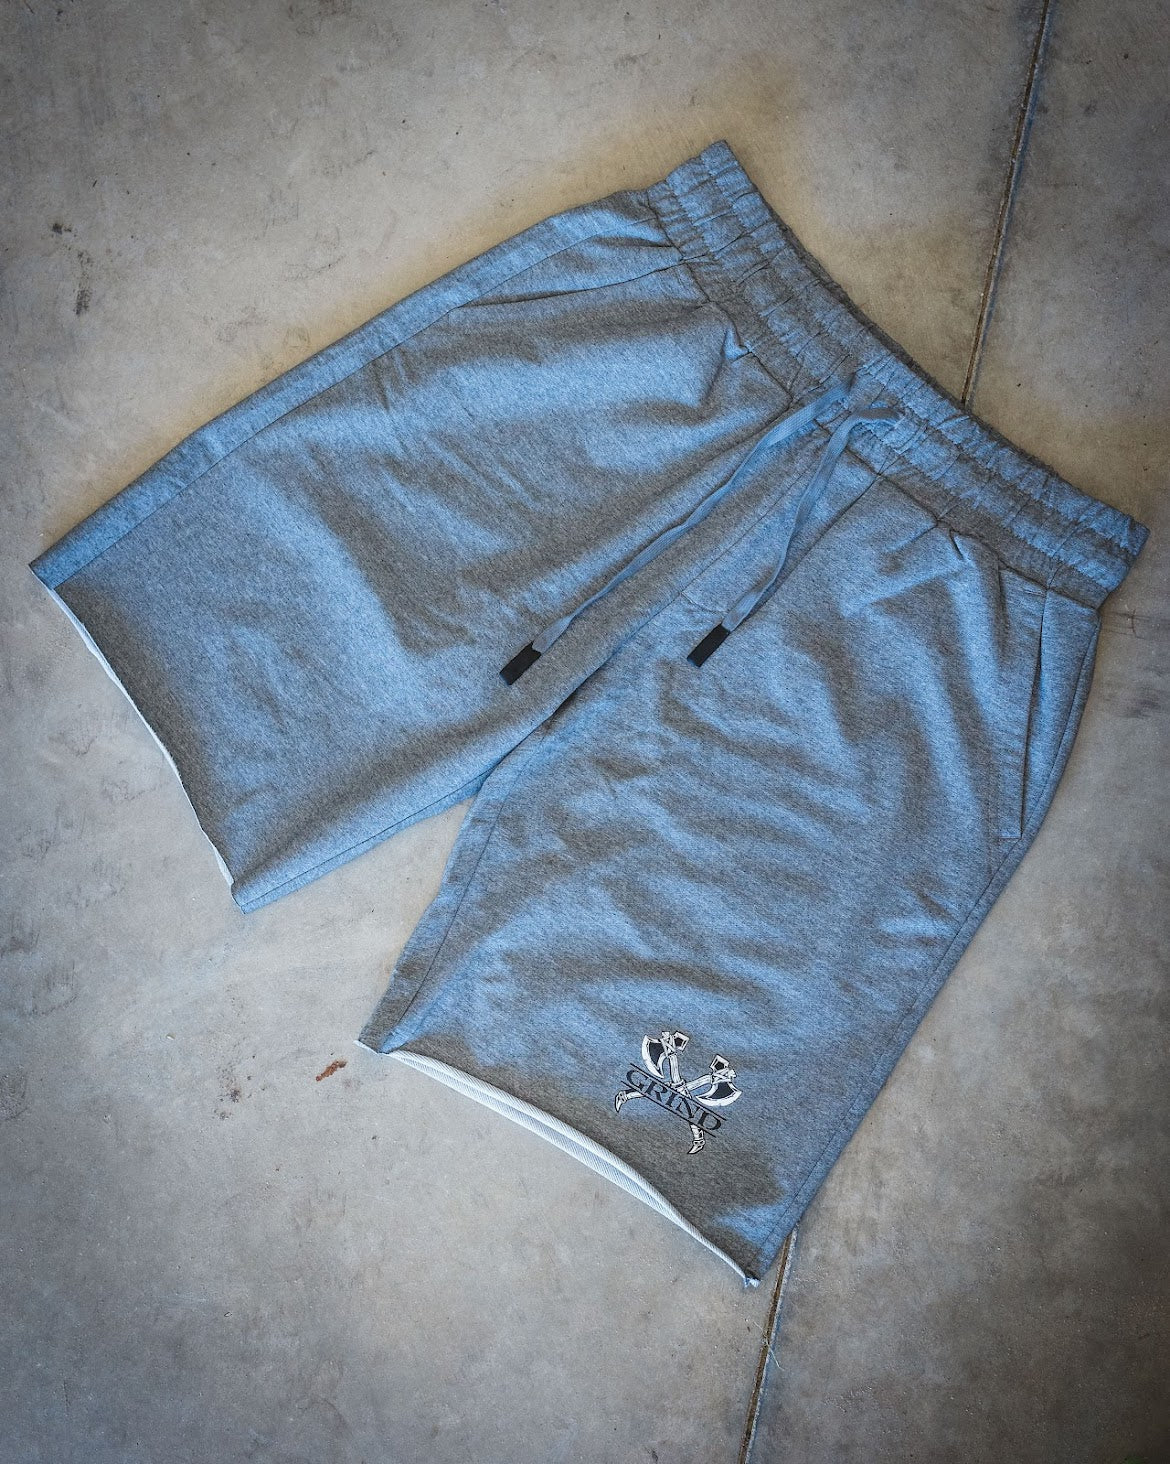 The Grind Athletics Shorts Classic Grind Shorts - Gray - Axes